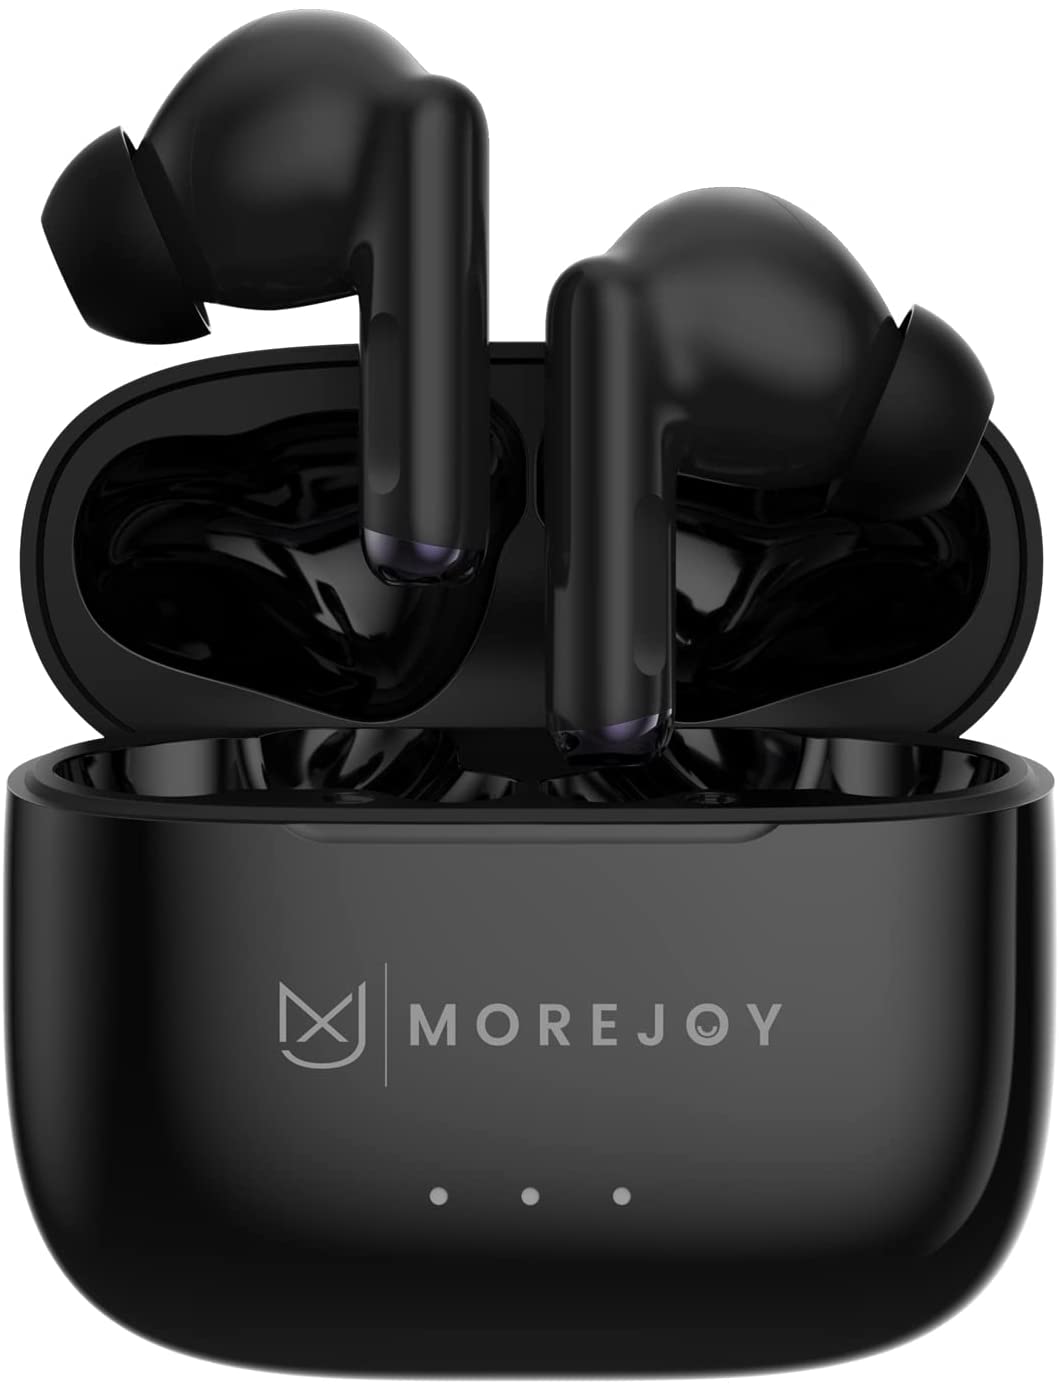 MoreJoy MJ141 Jouirbuds Pro Hybrid ANC Wireless Earbuds Active Noise Cancelling Headphones Bluetooth 5.2 Stereo in Ear Earphones, Immersive Sound Premium Deep Bass Built in 6 Mic Headset, Black